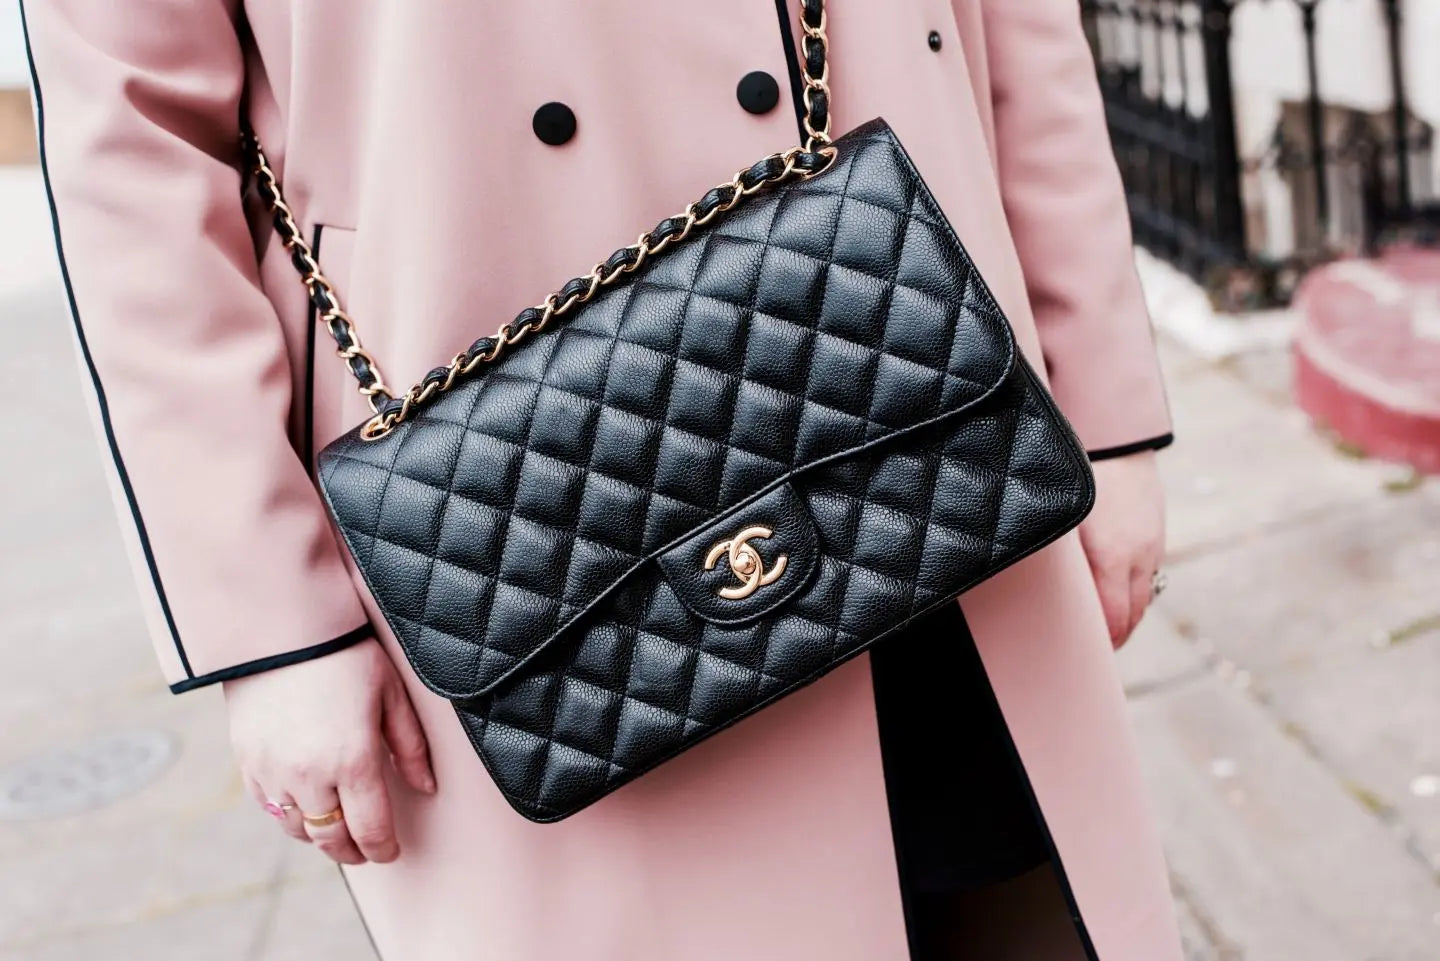 Hermès and Chanel limit bag purchases to keep them exclusive and